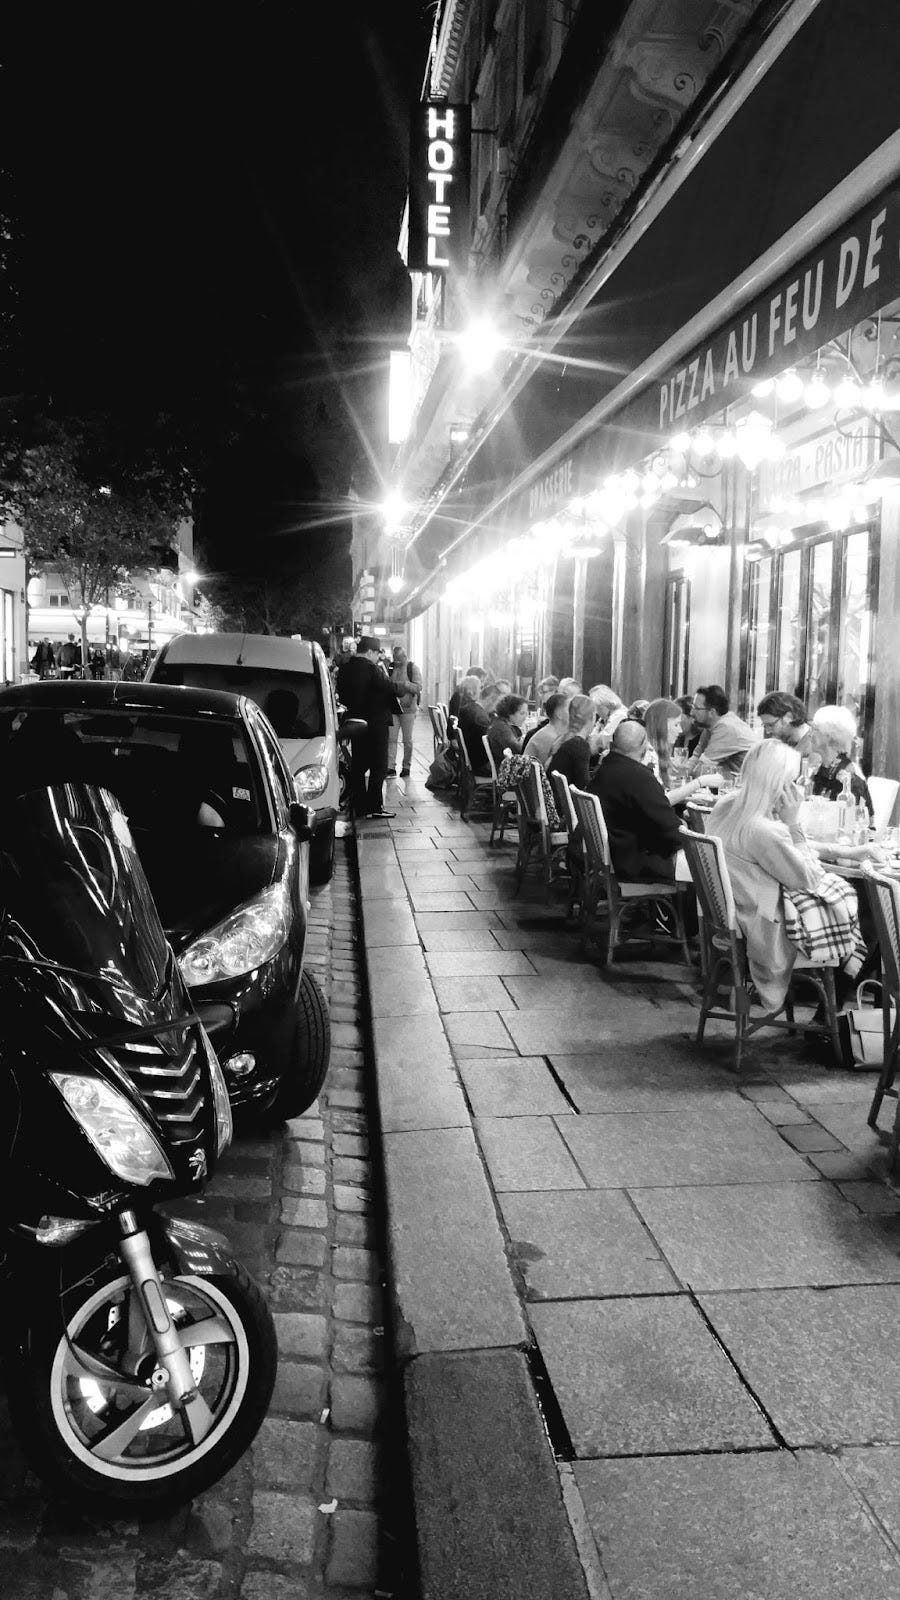 A black and white photo with a line of parked cars on the left side, and a scene of people dining outdoors at a cafe on the right side.